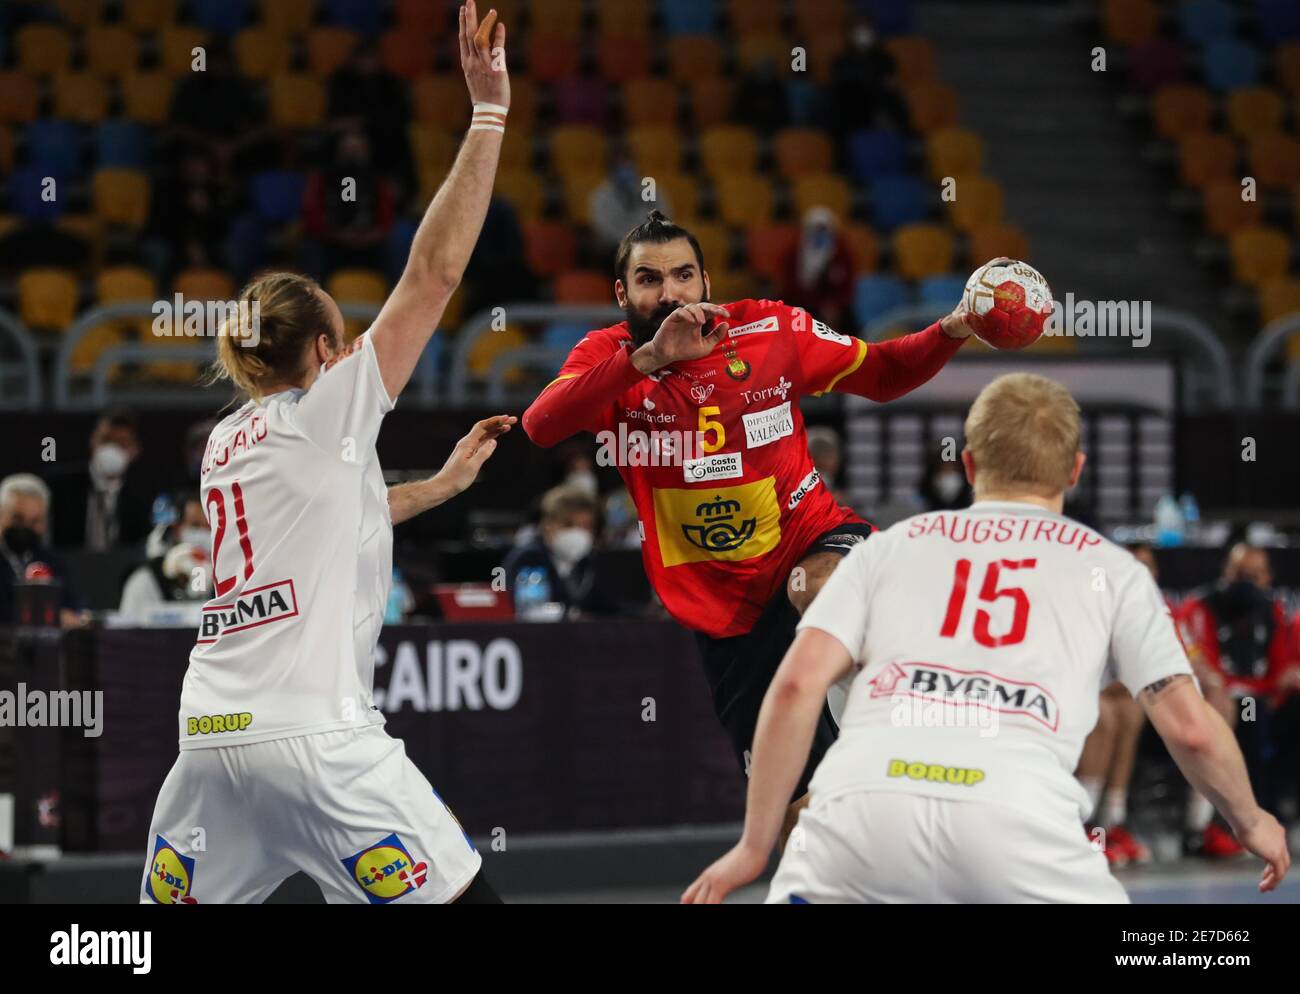 Cairo, Egypt. 29th Jan, 2021. Jorge Maqueda Peno (C) of Spain competes during a semifinal match between Spain and Denmark at the 27th Men's Handball World Championship 2021 in Cairo, Egypt, on Jan. 29, 2021. Credit: Str/Xinhua/Alamy Live News Stock Photo